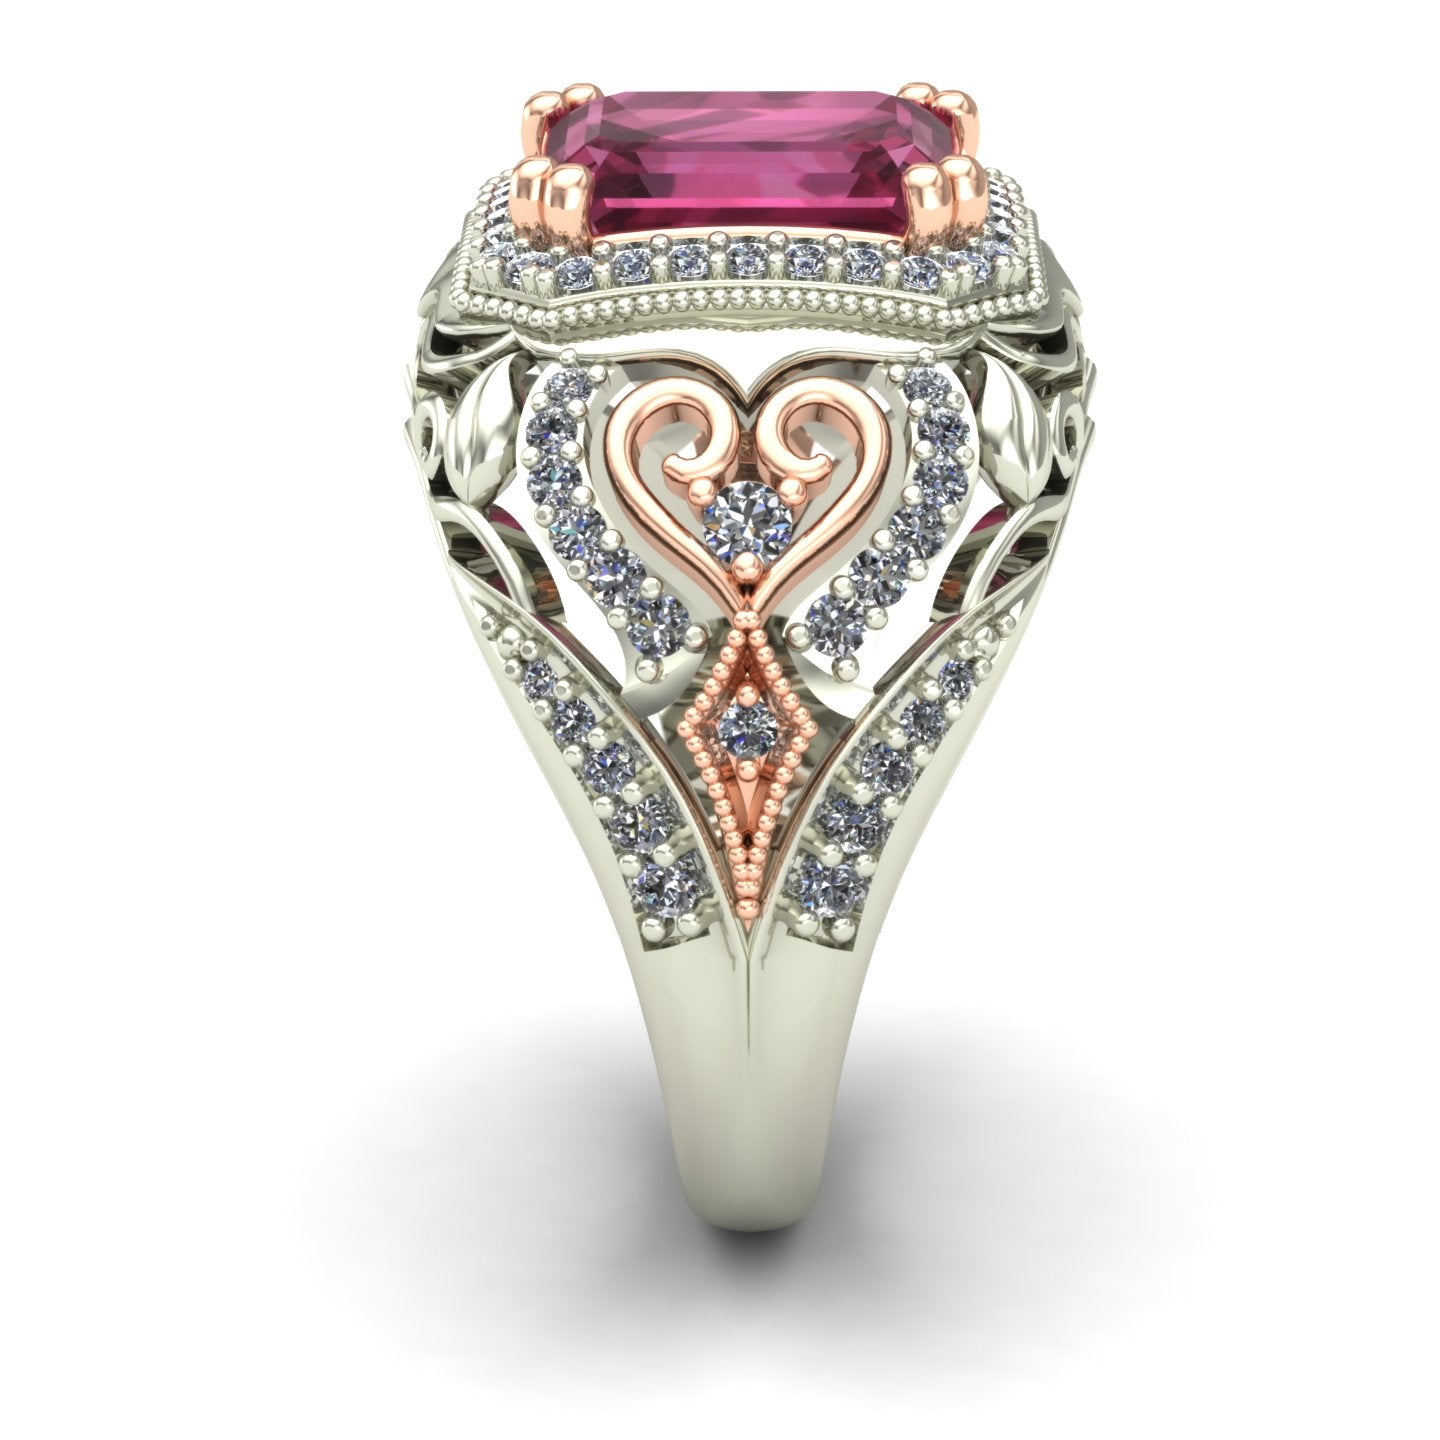 emerald cut pink tourmaline and diamond two tone dome ring in 14k rose and white gold - Charles Babb Designs - side view